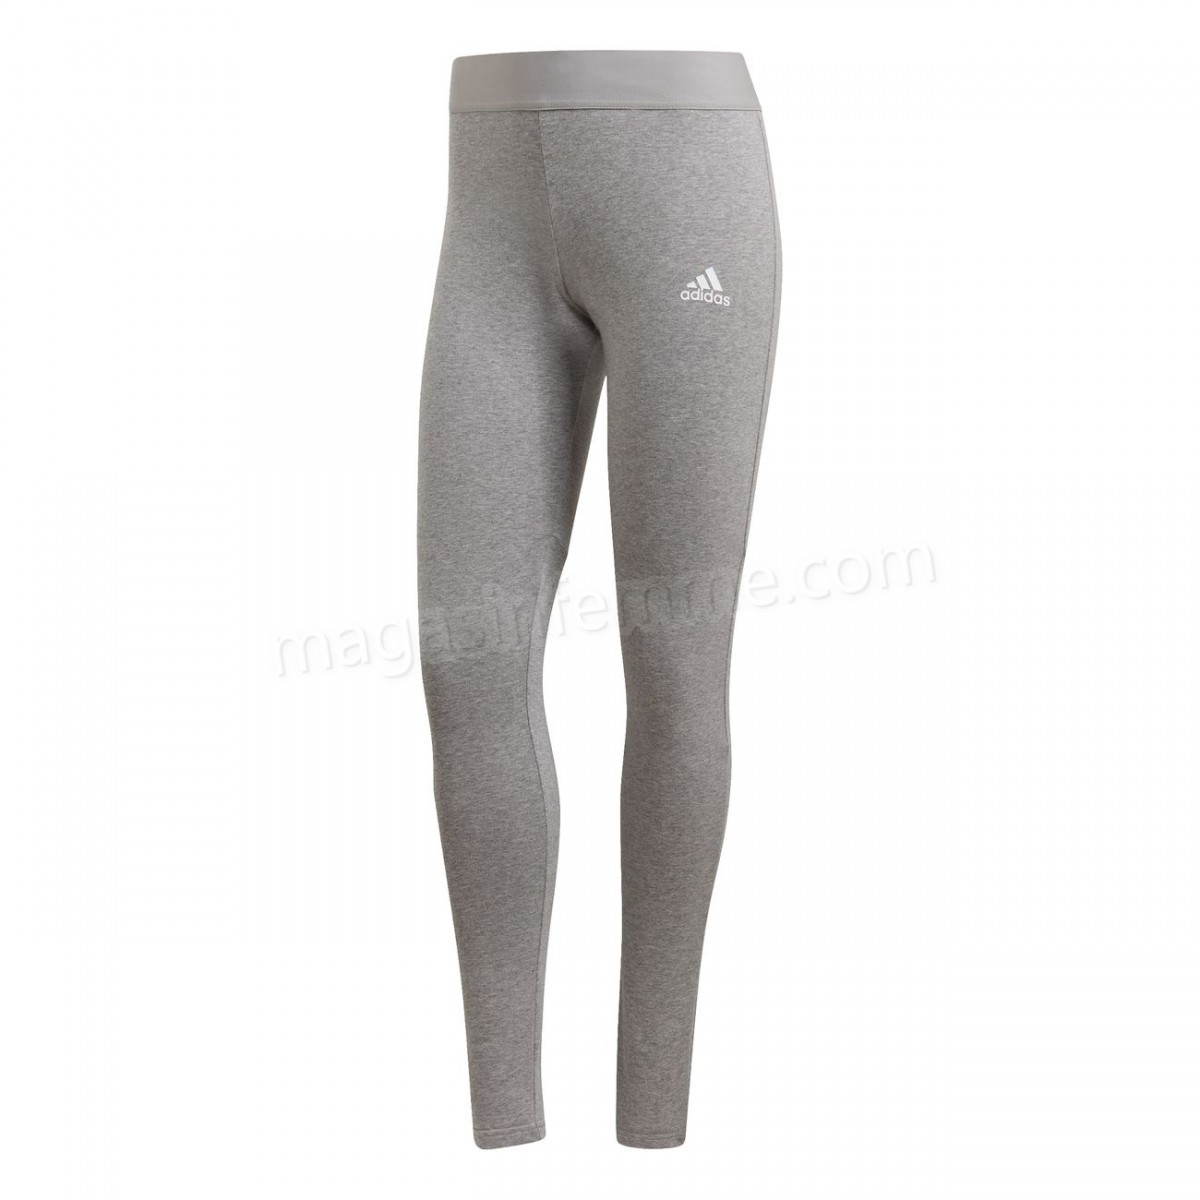 Adidas-Fitness femme ADIDAS Collant femme adidas Must Haves 3-Stripes en solde - -9